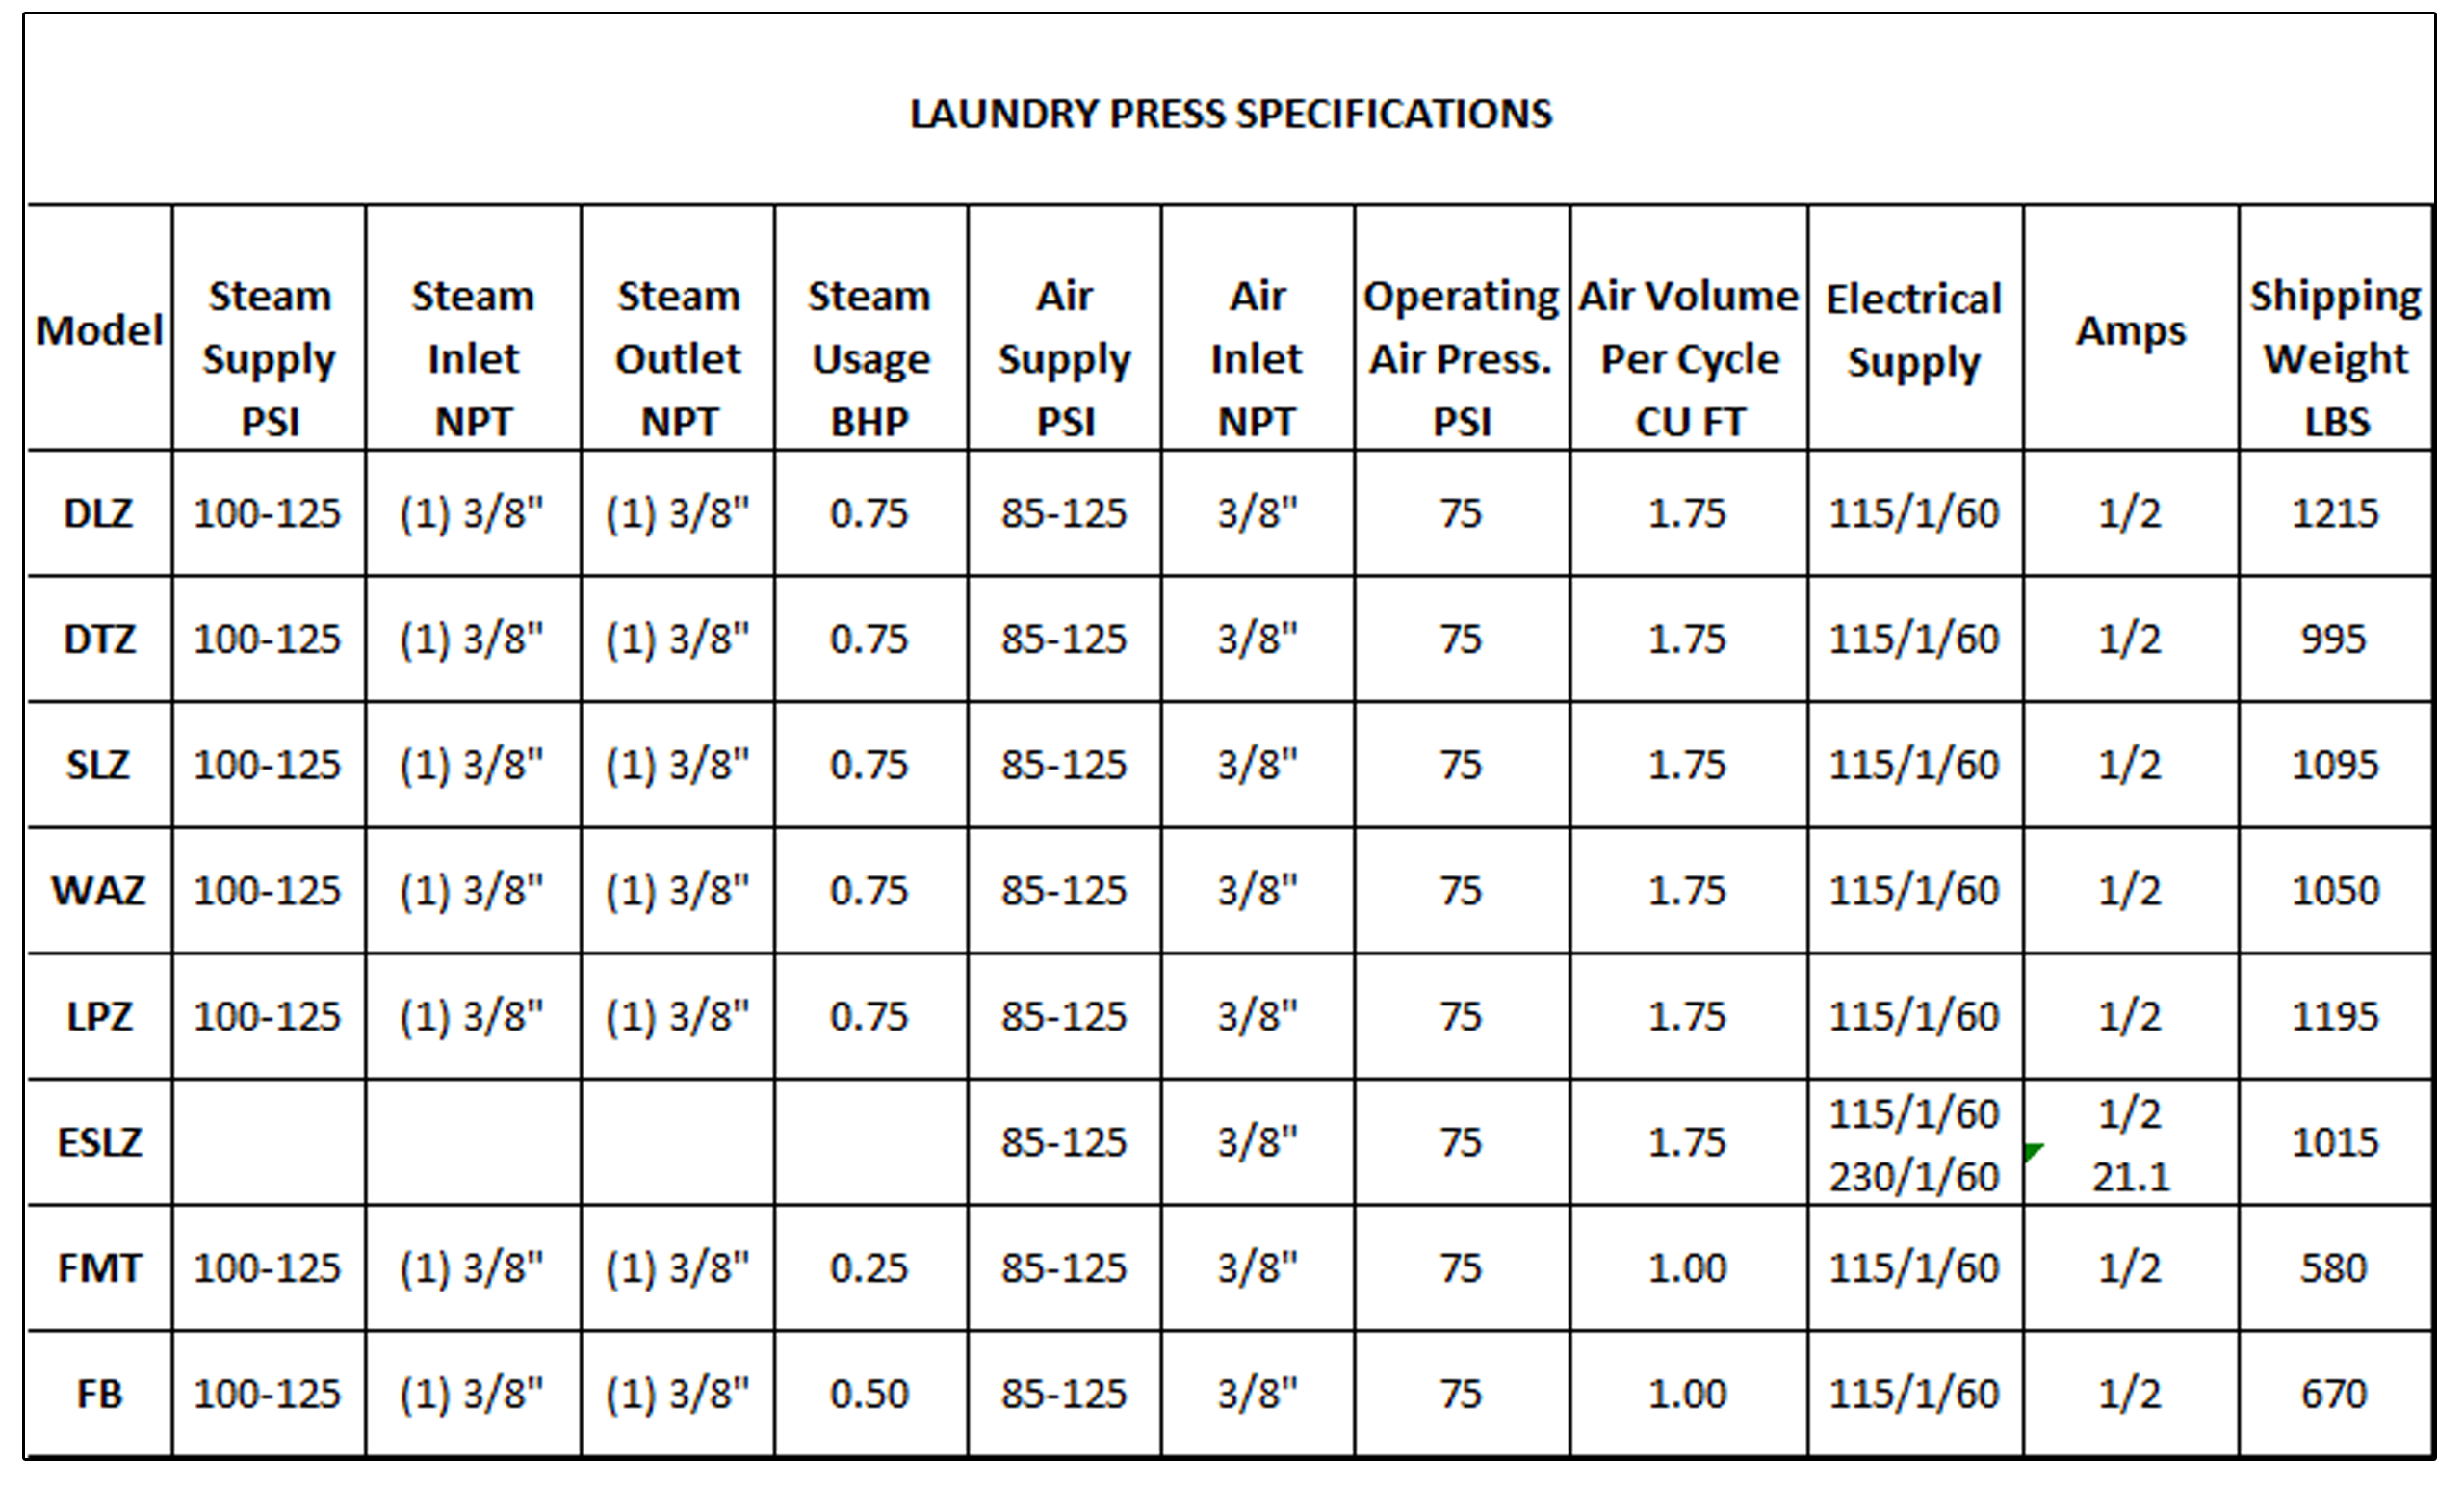 Laundry Press Specifications